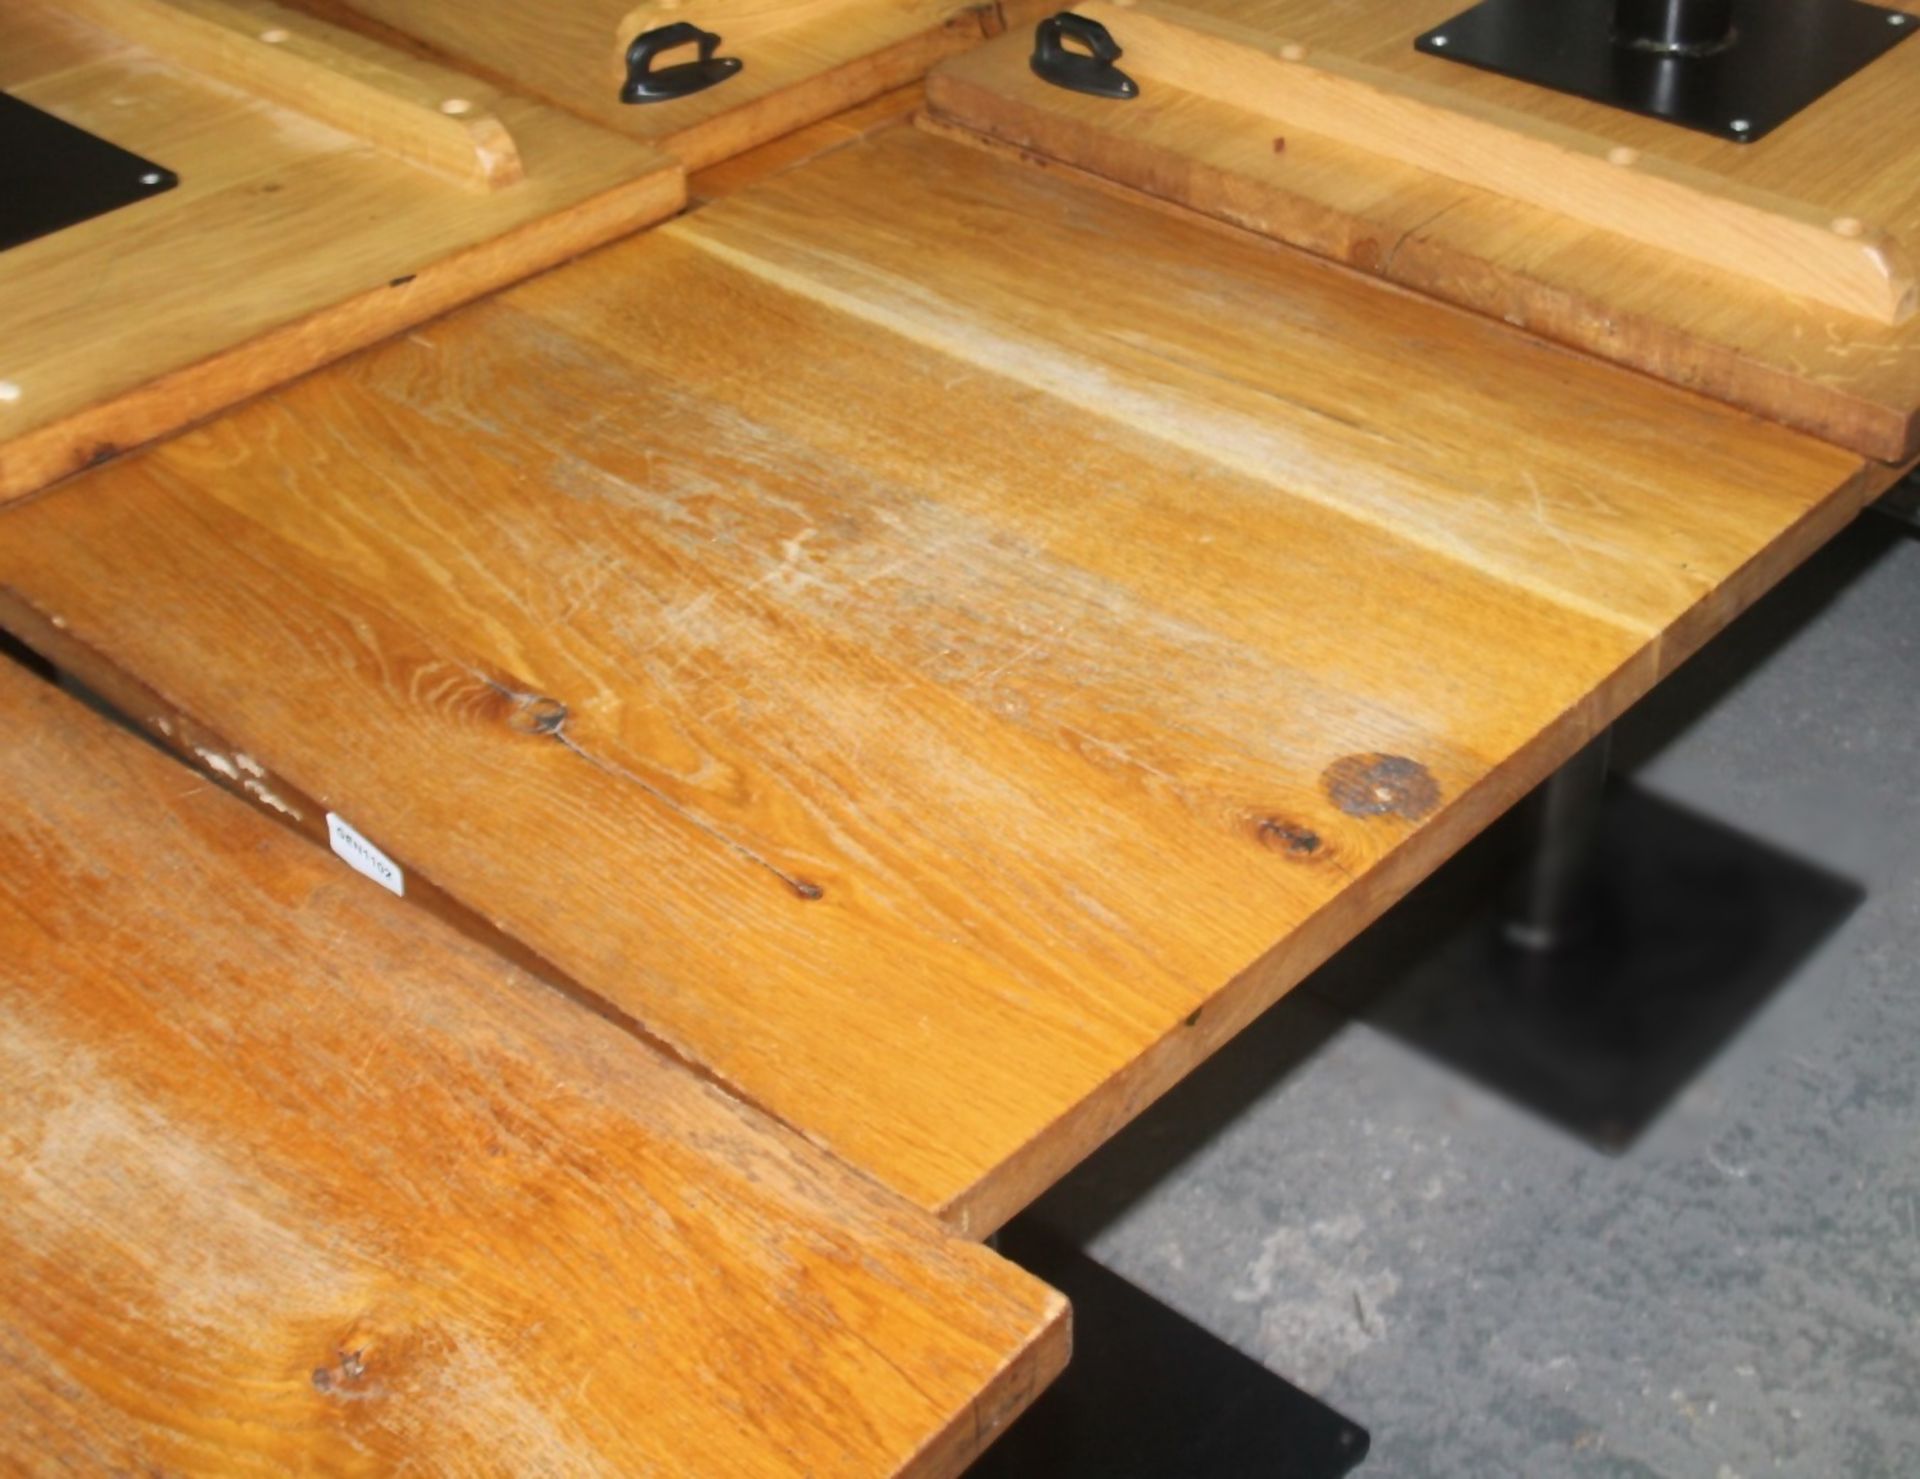 4 x Solid Oak Restaurant Dining Tables - Natural Rustic Knotty Oak Tops With Black Cast Iron Bases - - Image 3 of 7